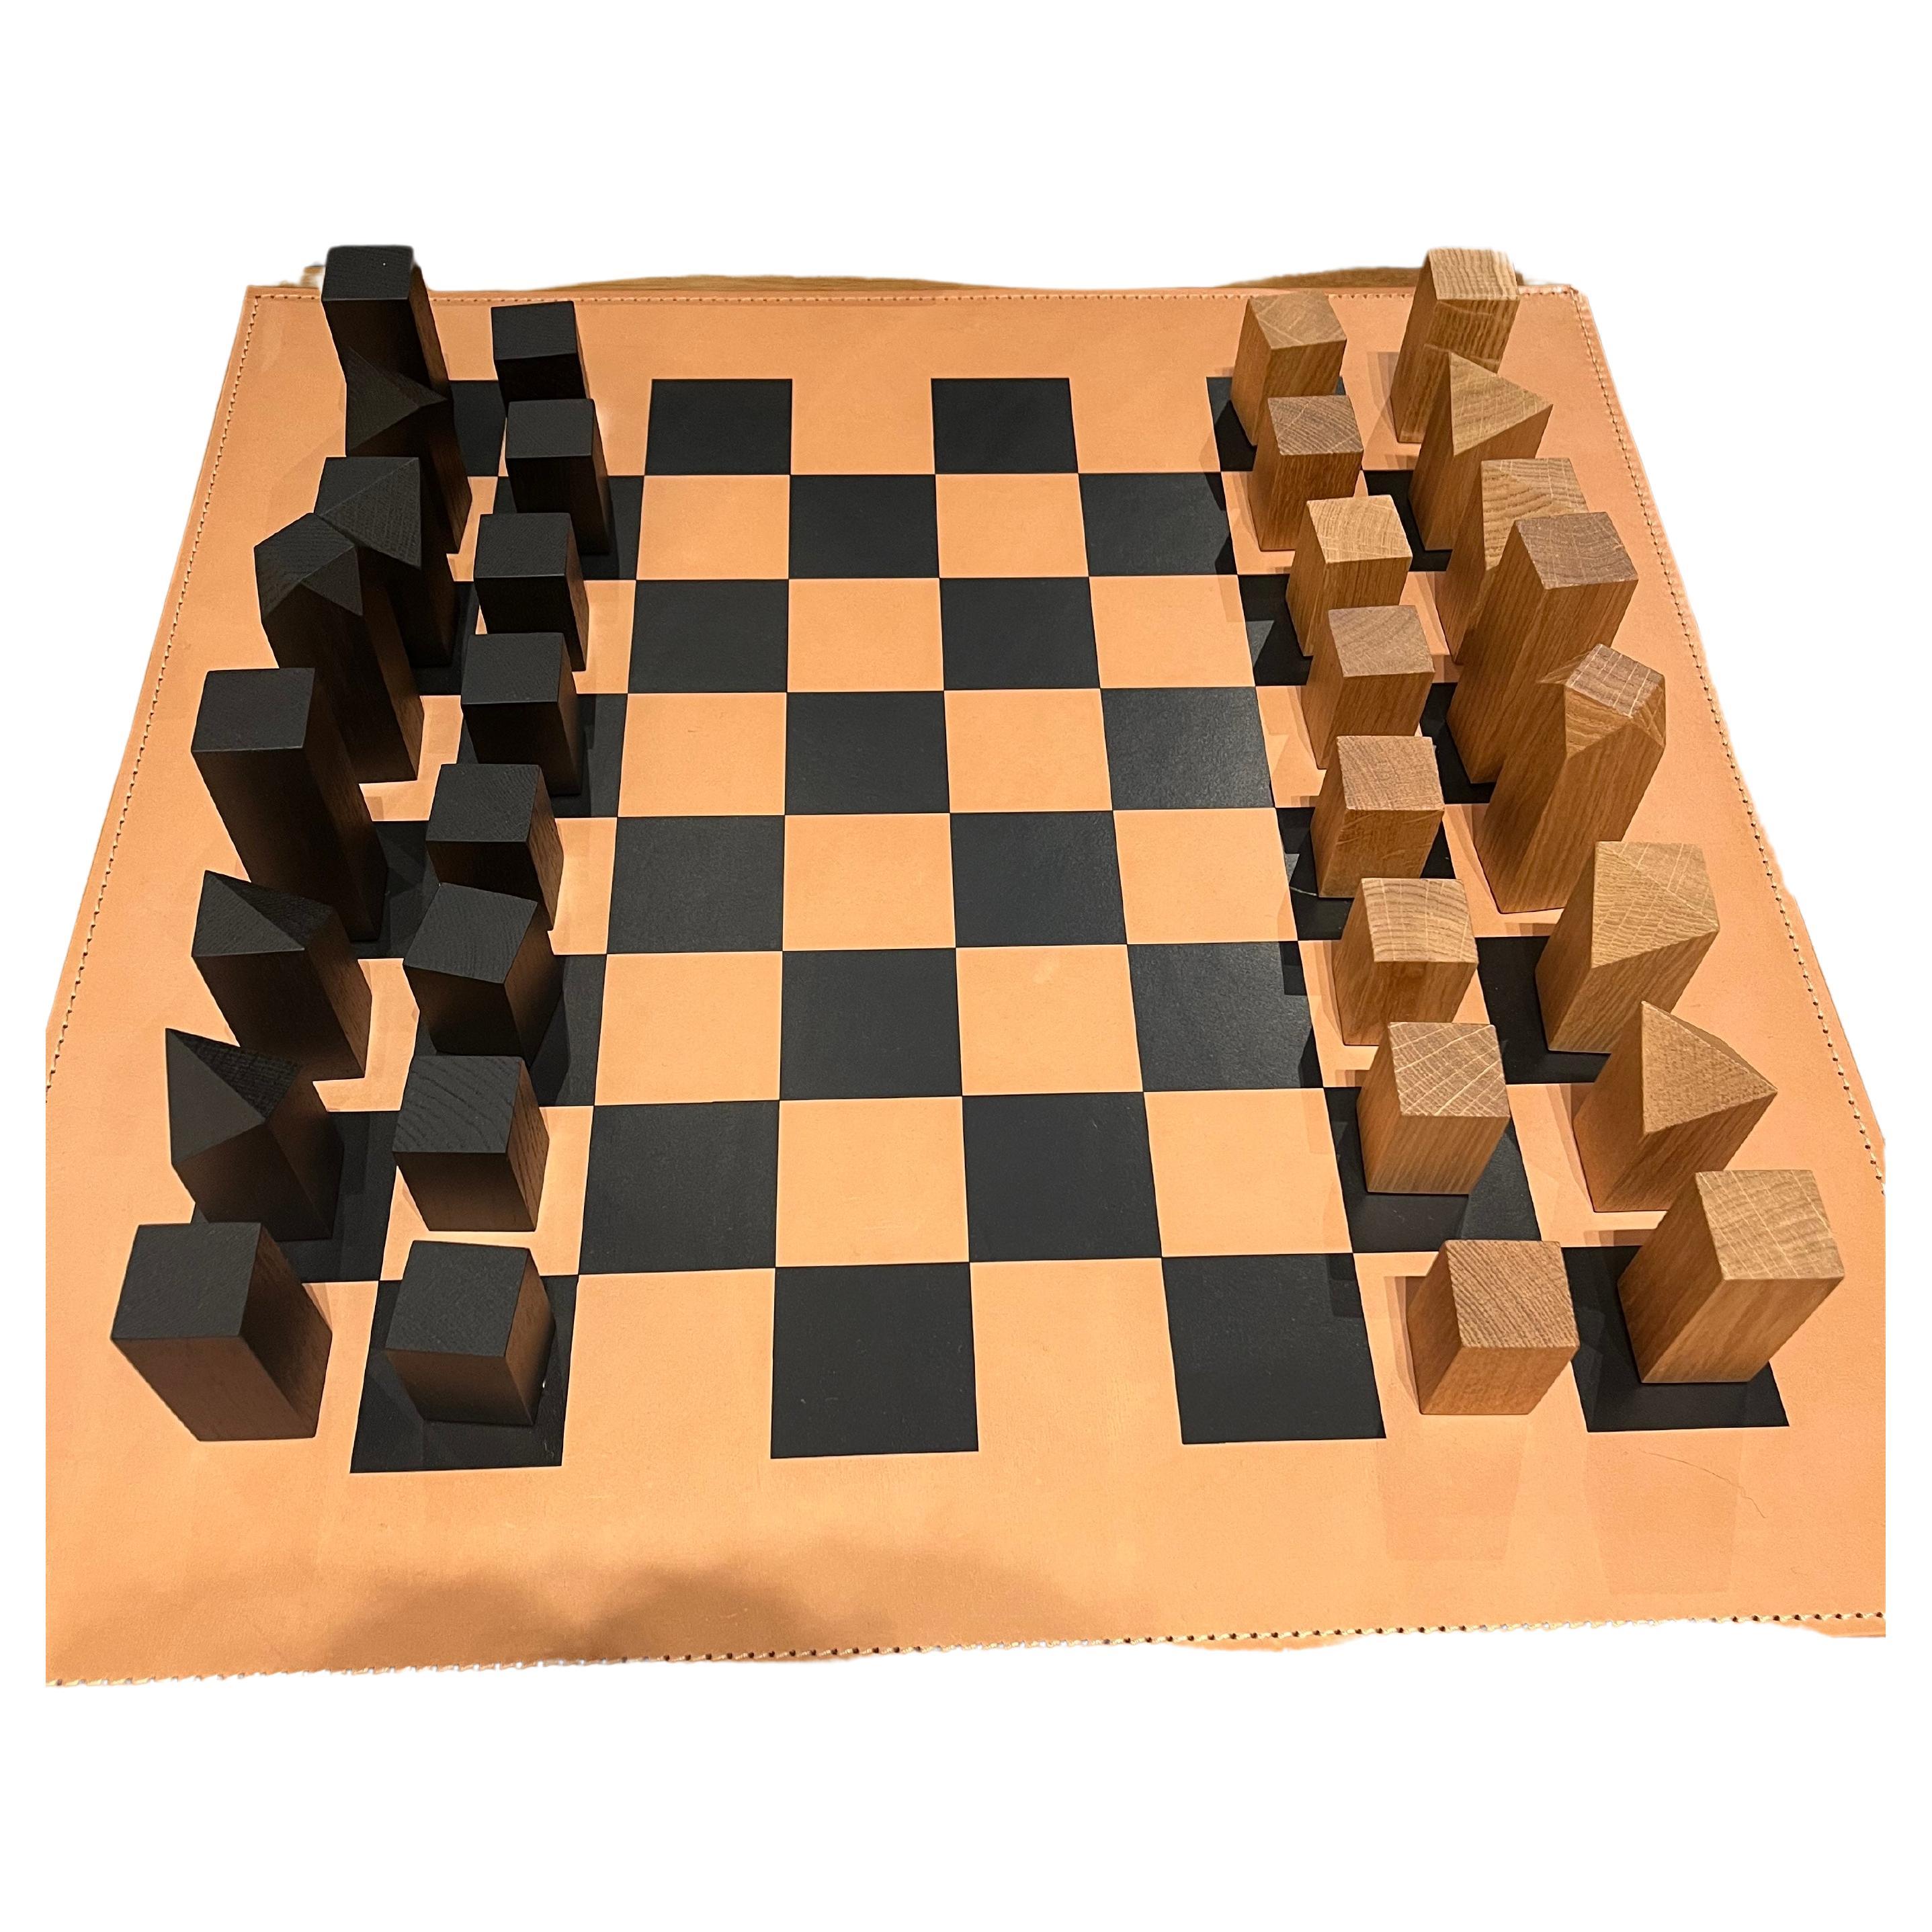 e15 Nona Leather Chess Board and Chess Figures by Annabelle Klute in STOCK